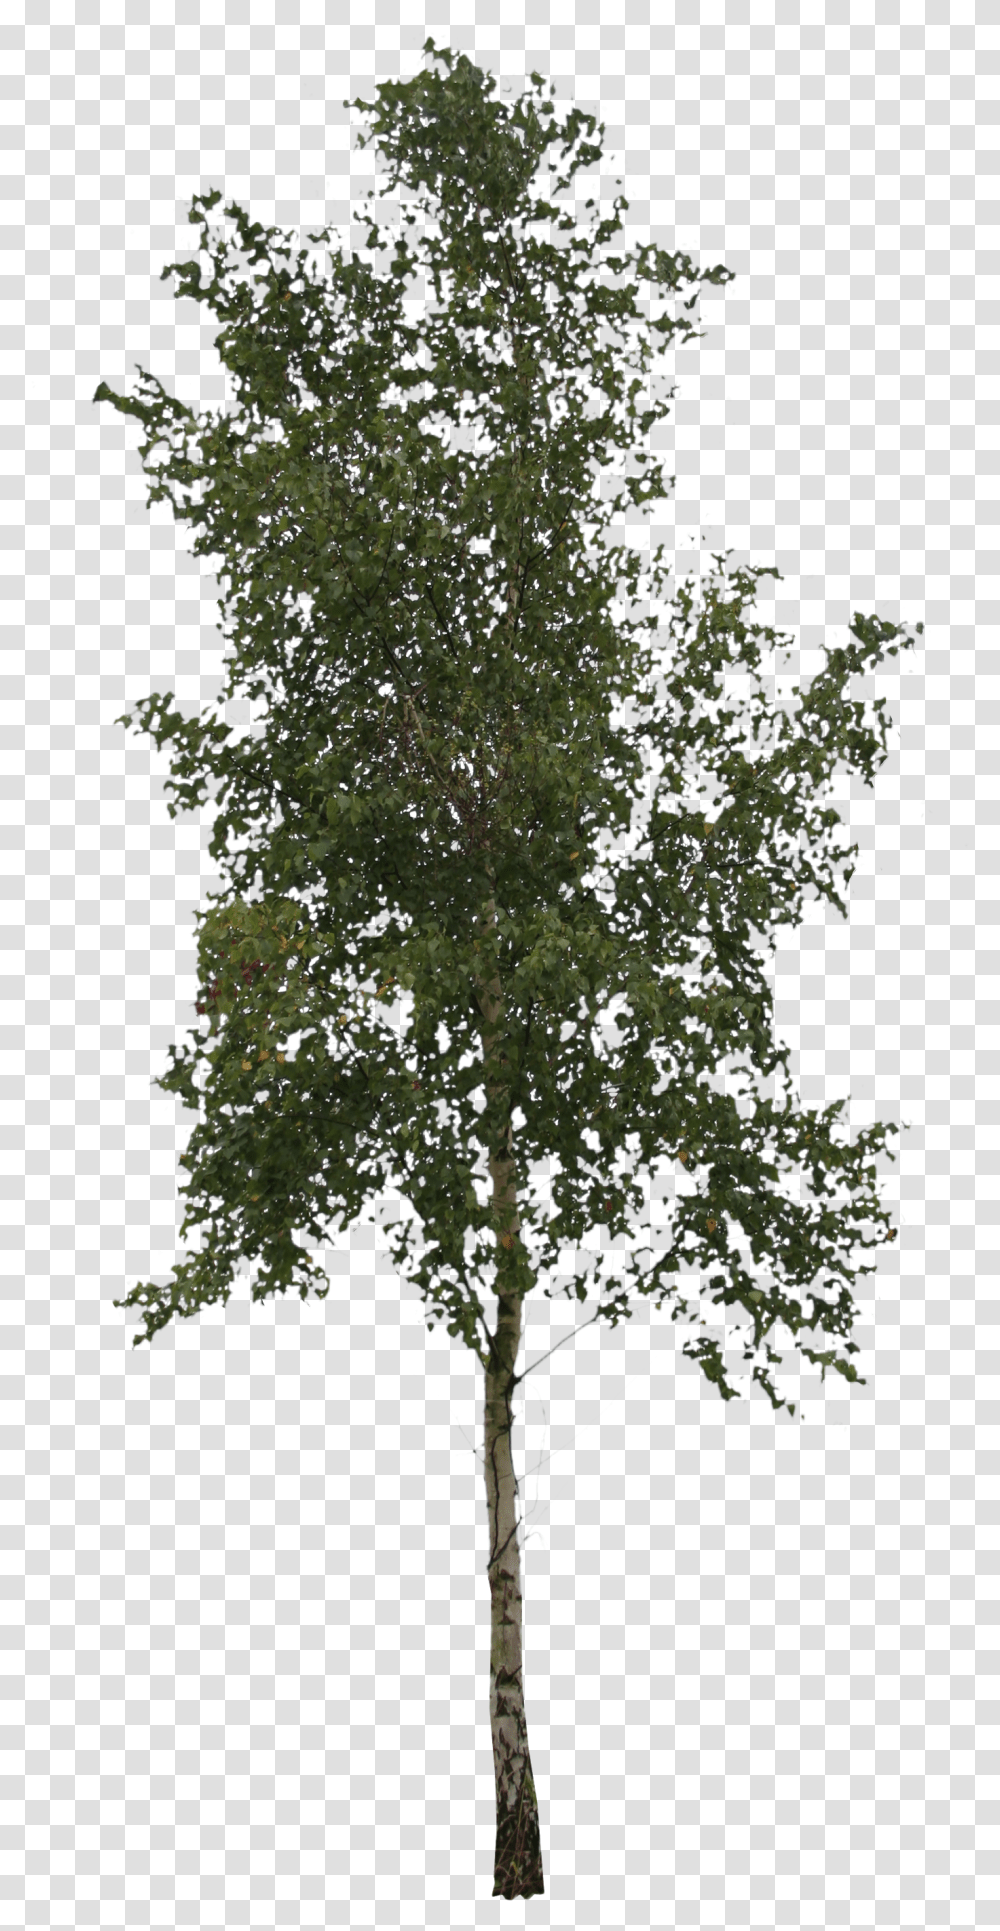 Free Cut Out Tree Birch People Trees And Leaves, Plant, Maple, Cross, Symbol Transparent Png